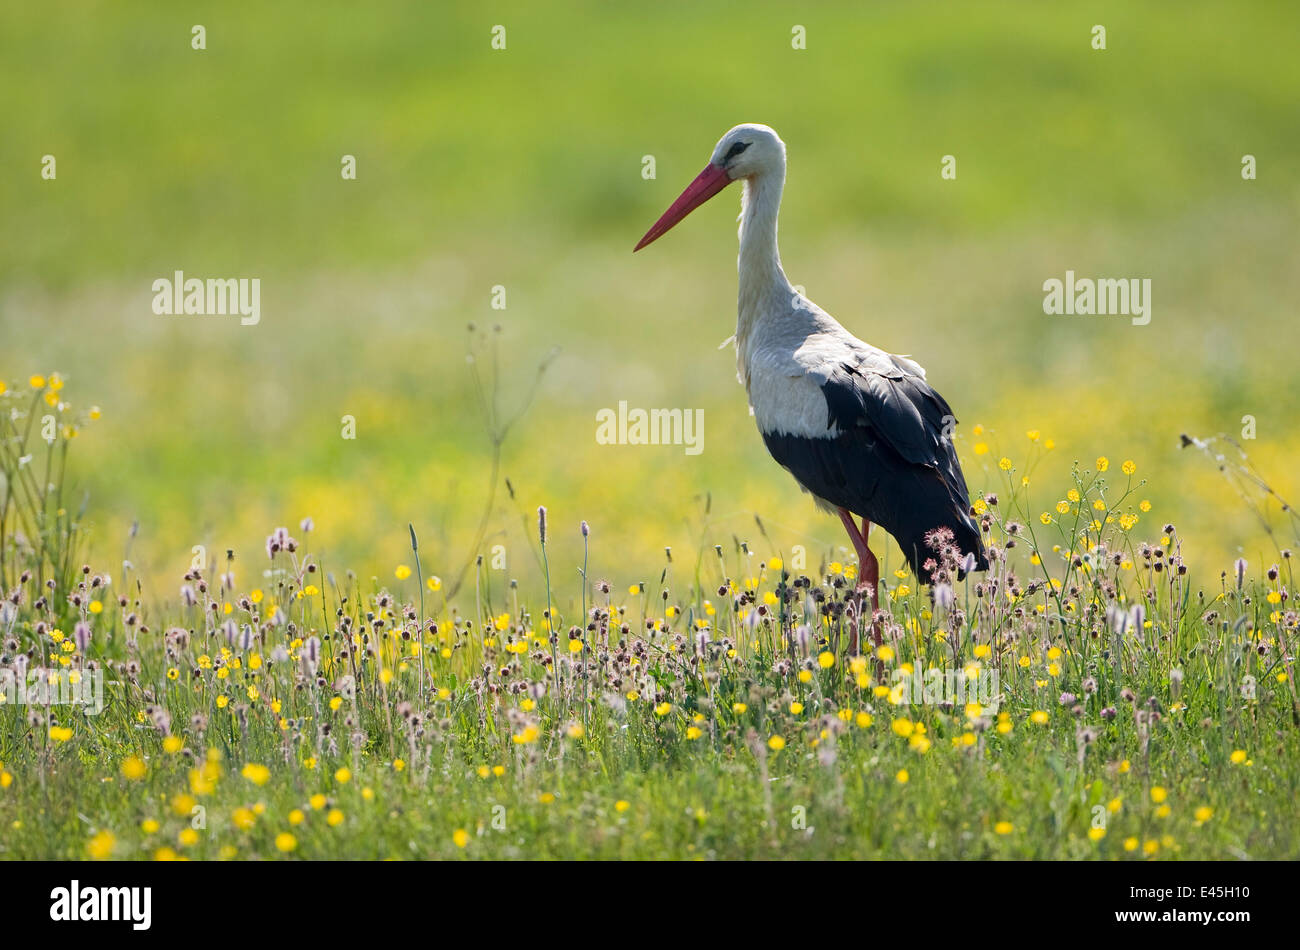 White stork (Ciconia ciconia) in flower meadow, Labanoras Regional Park, Lithuania, May 2009 Stock Photo